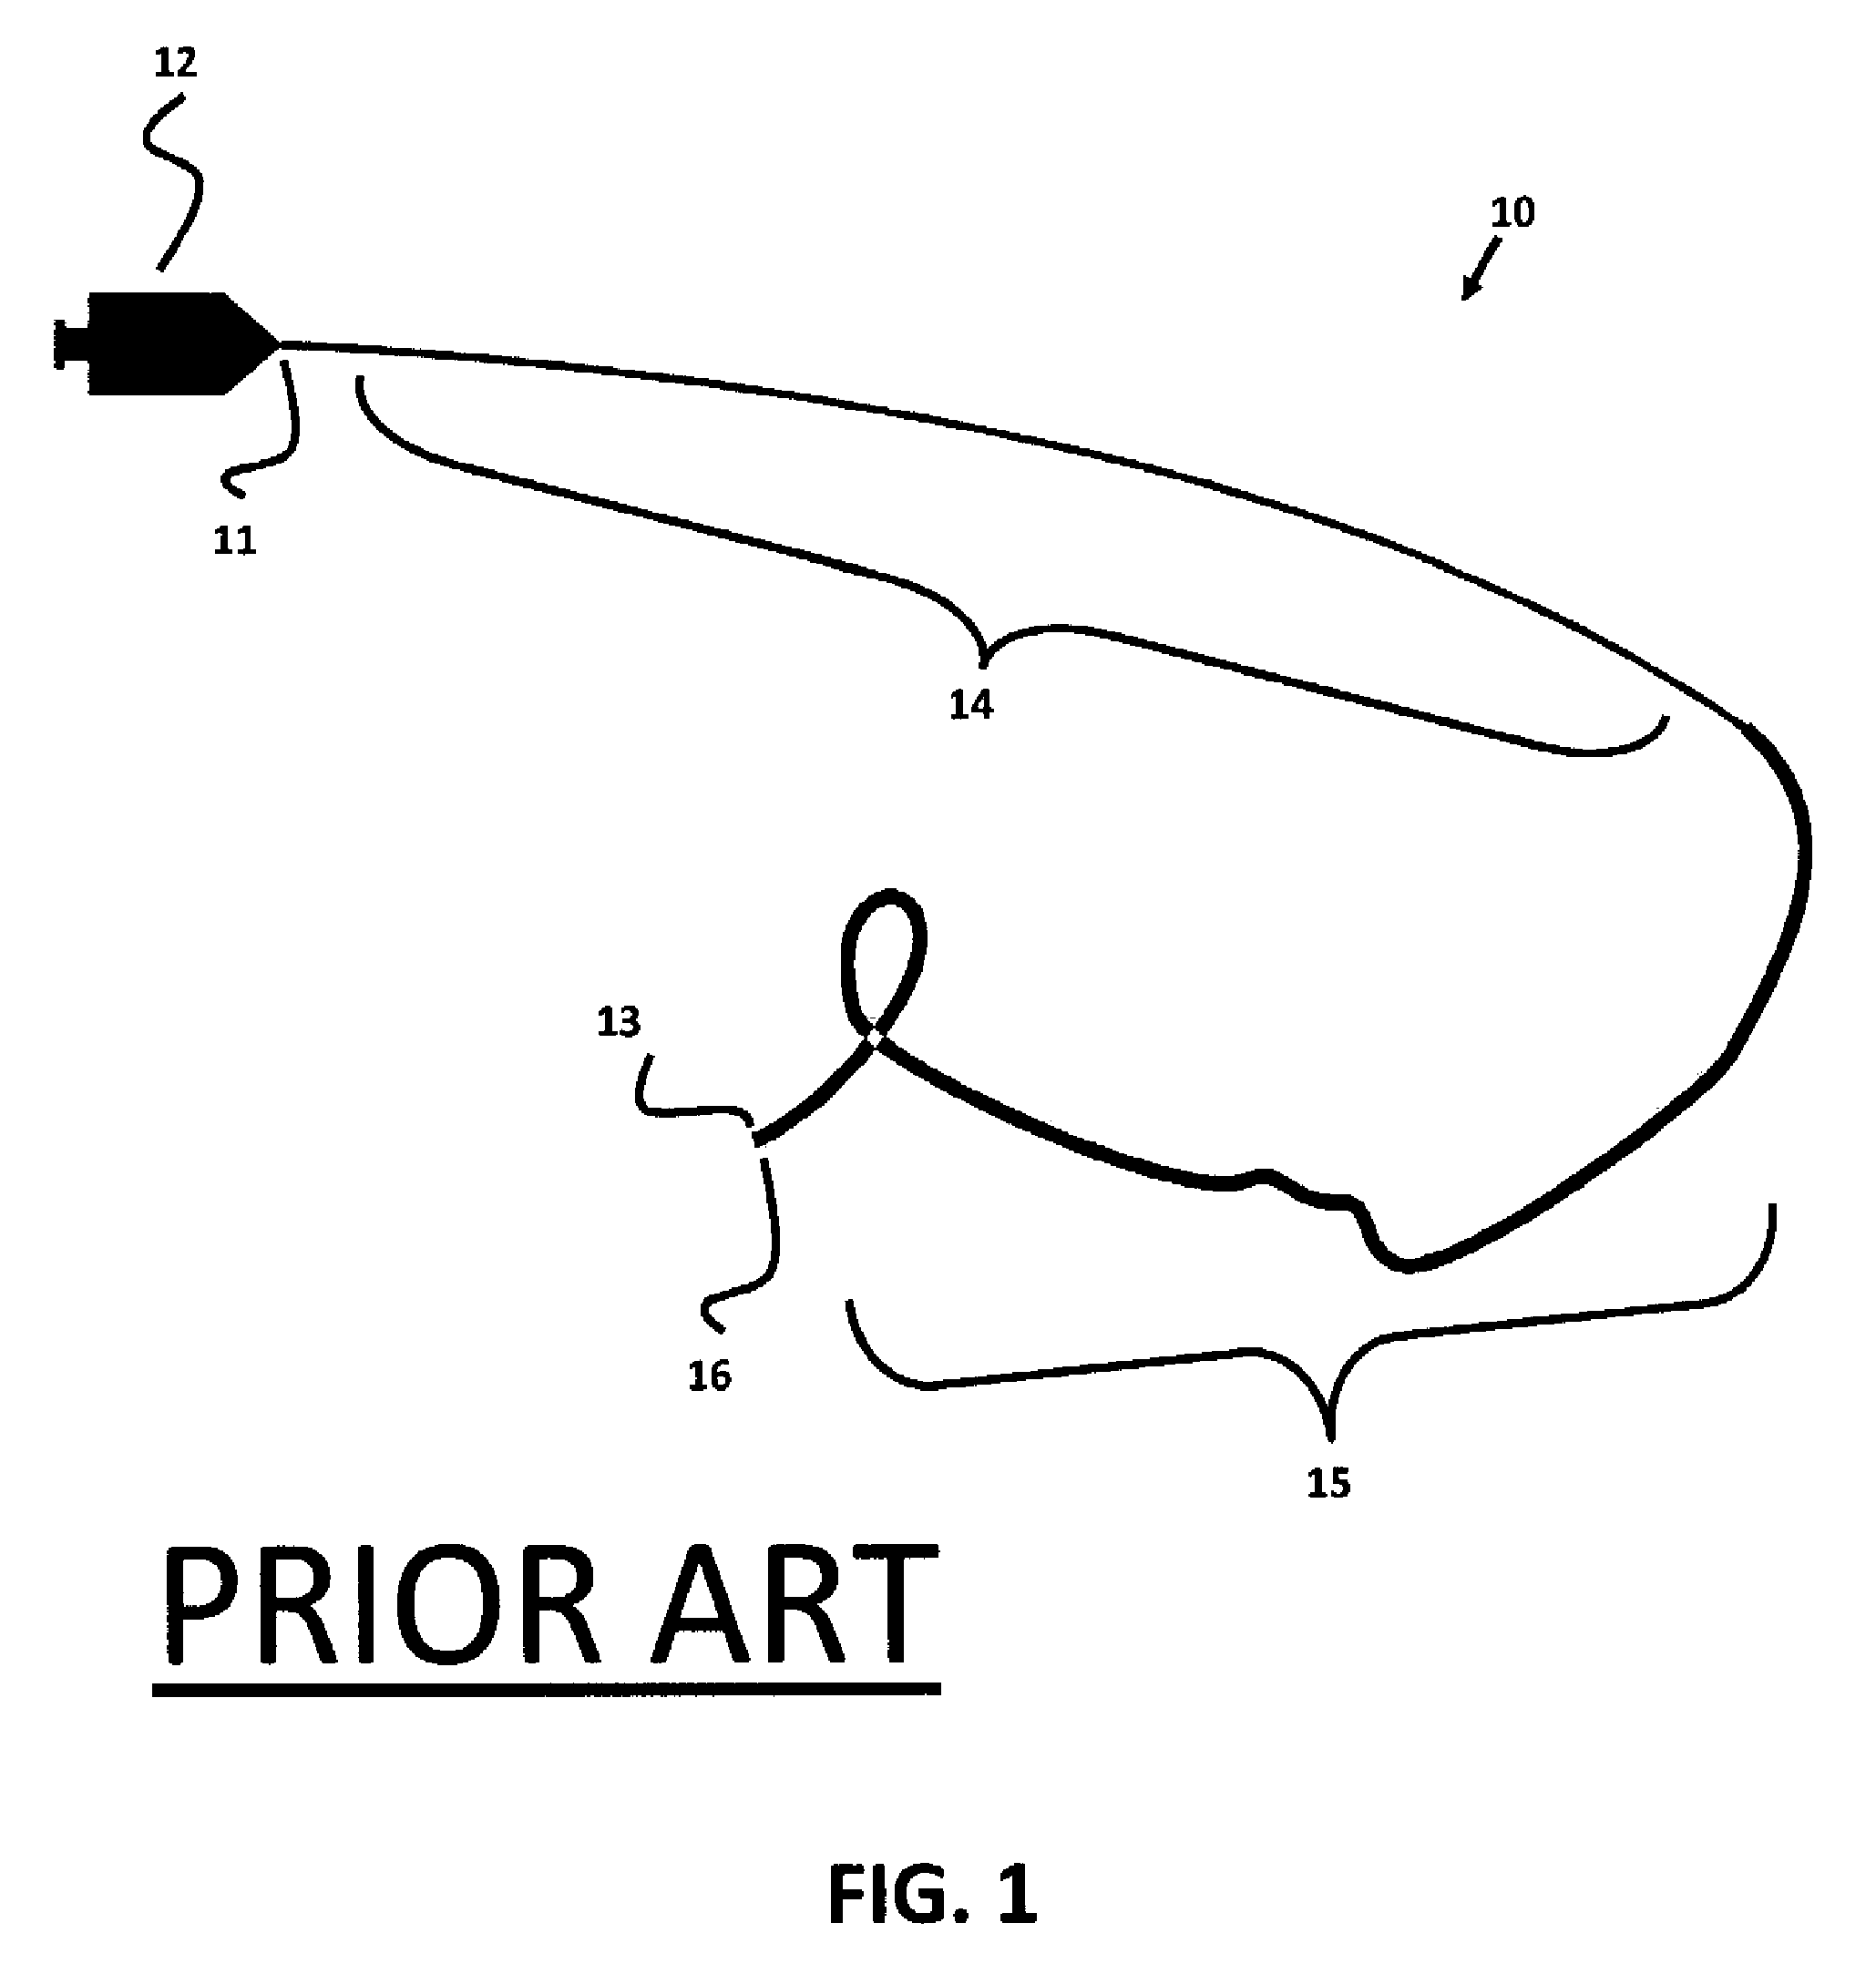 Micro-fabricated Catheter Devices Formed Having Elastomeric Fill Compositions